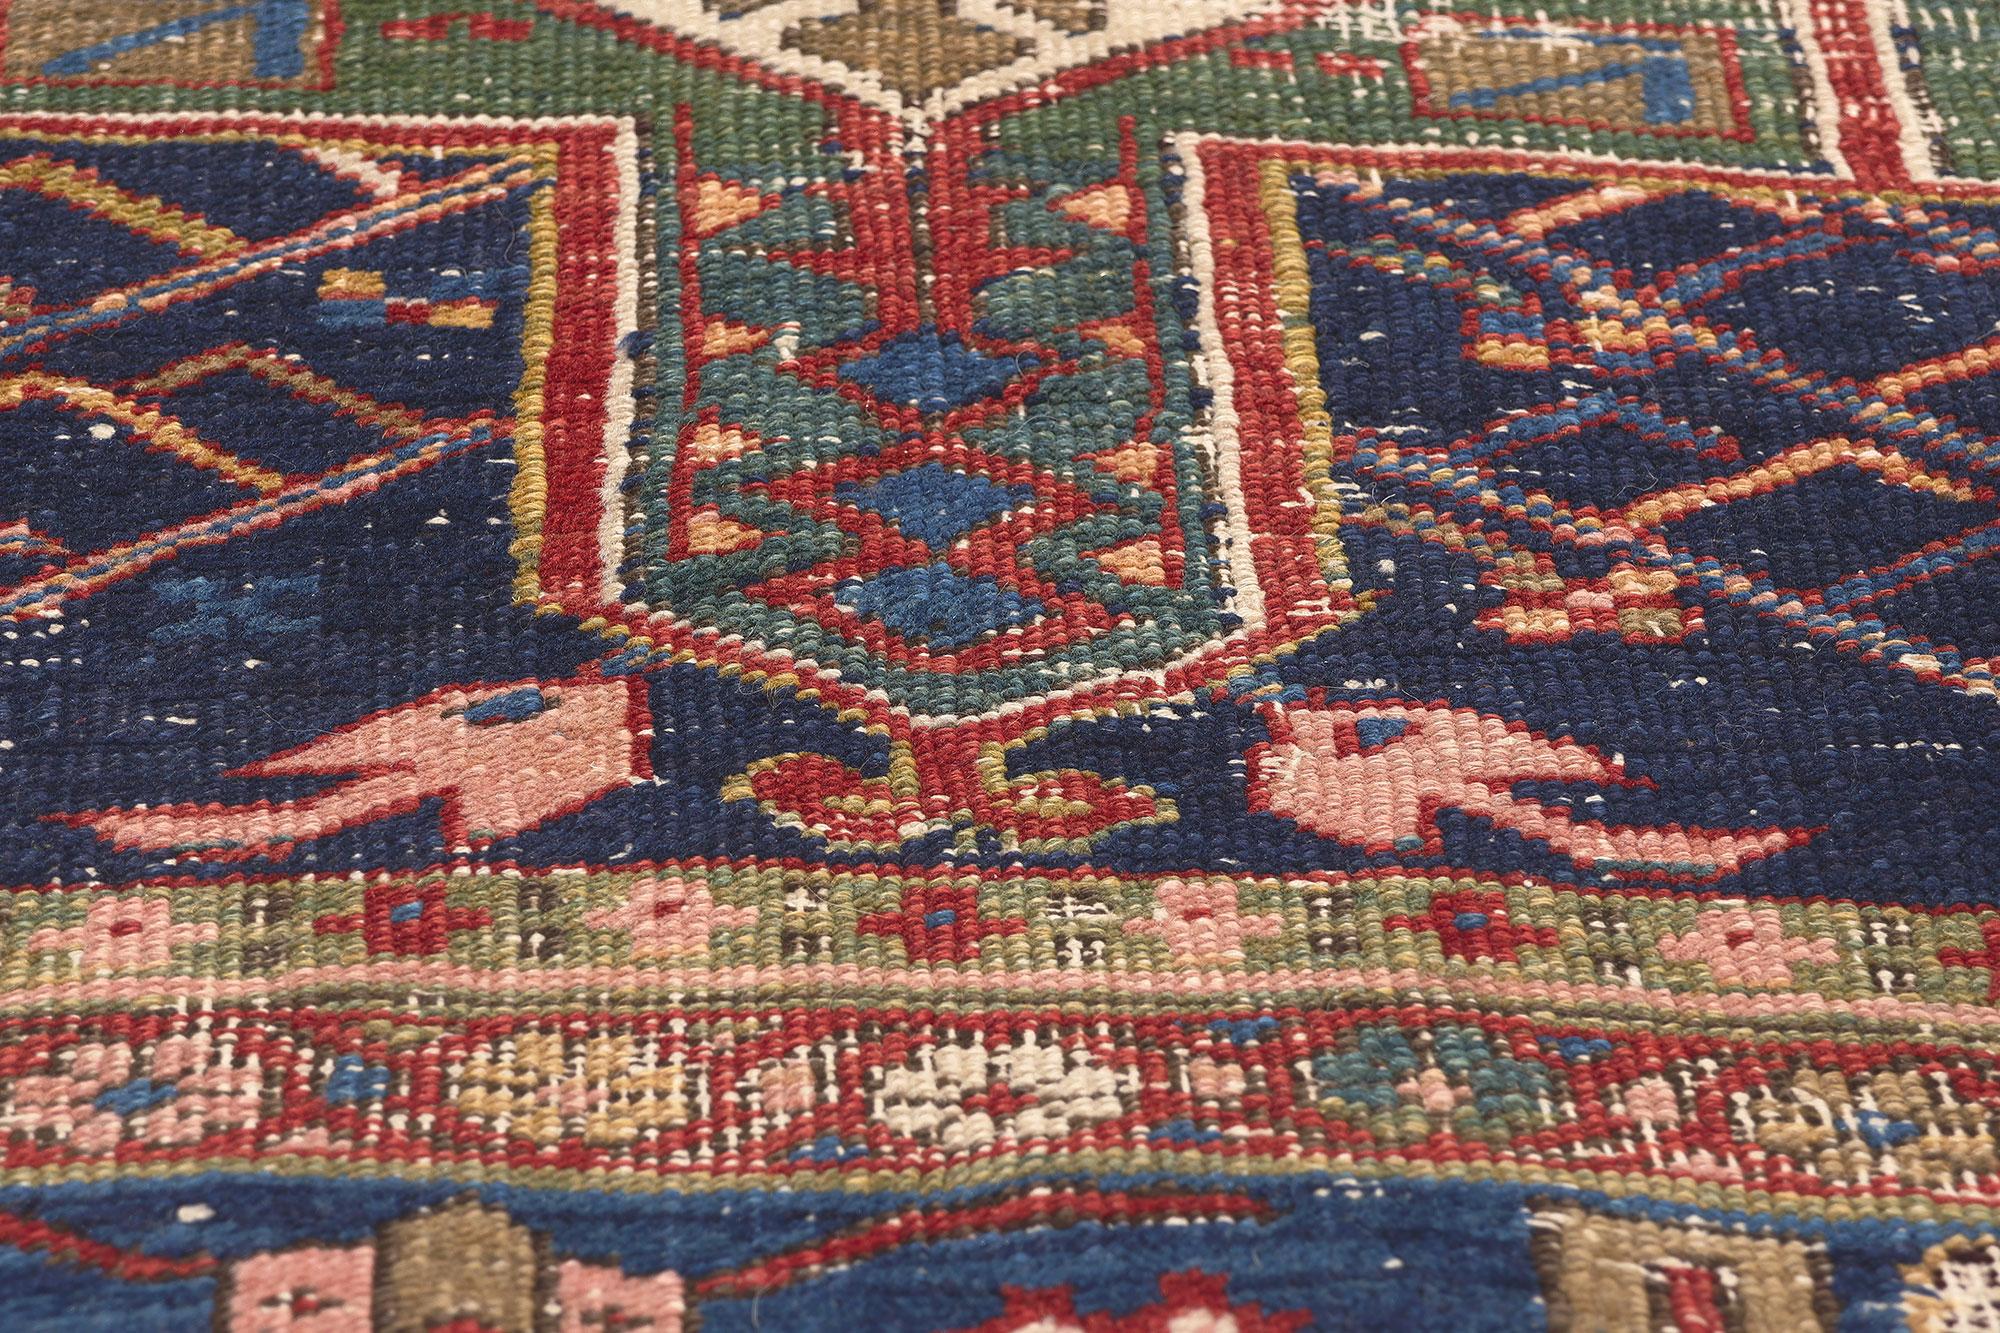 19th Century Antique Worn Persian Serapi Rug, Rugged Beauty Meets Modern Masculine For Sale